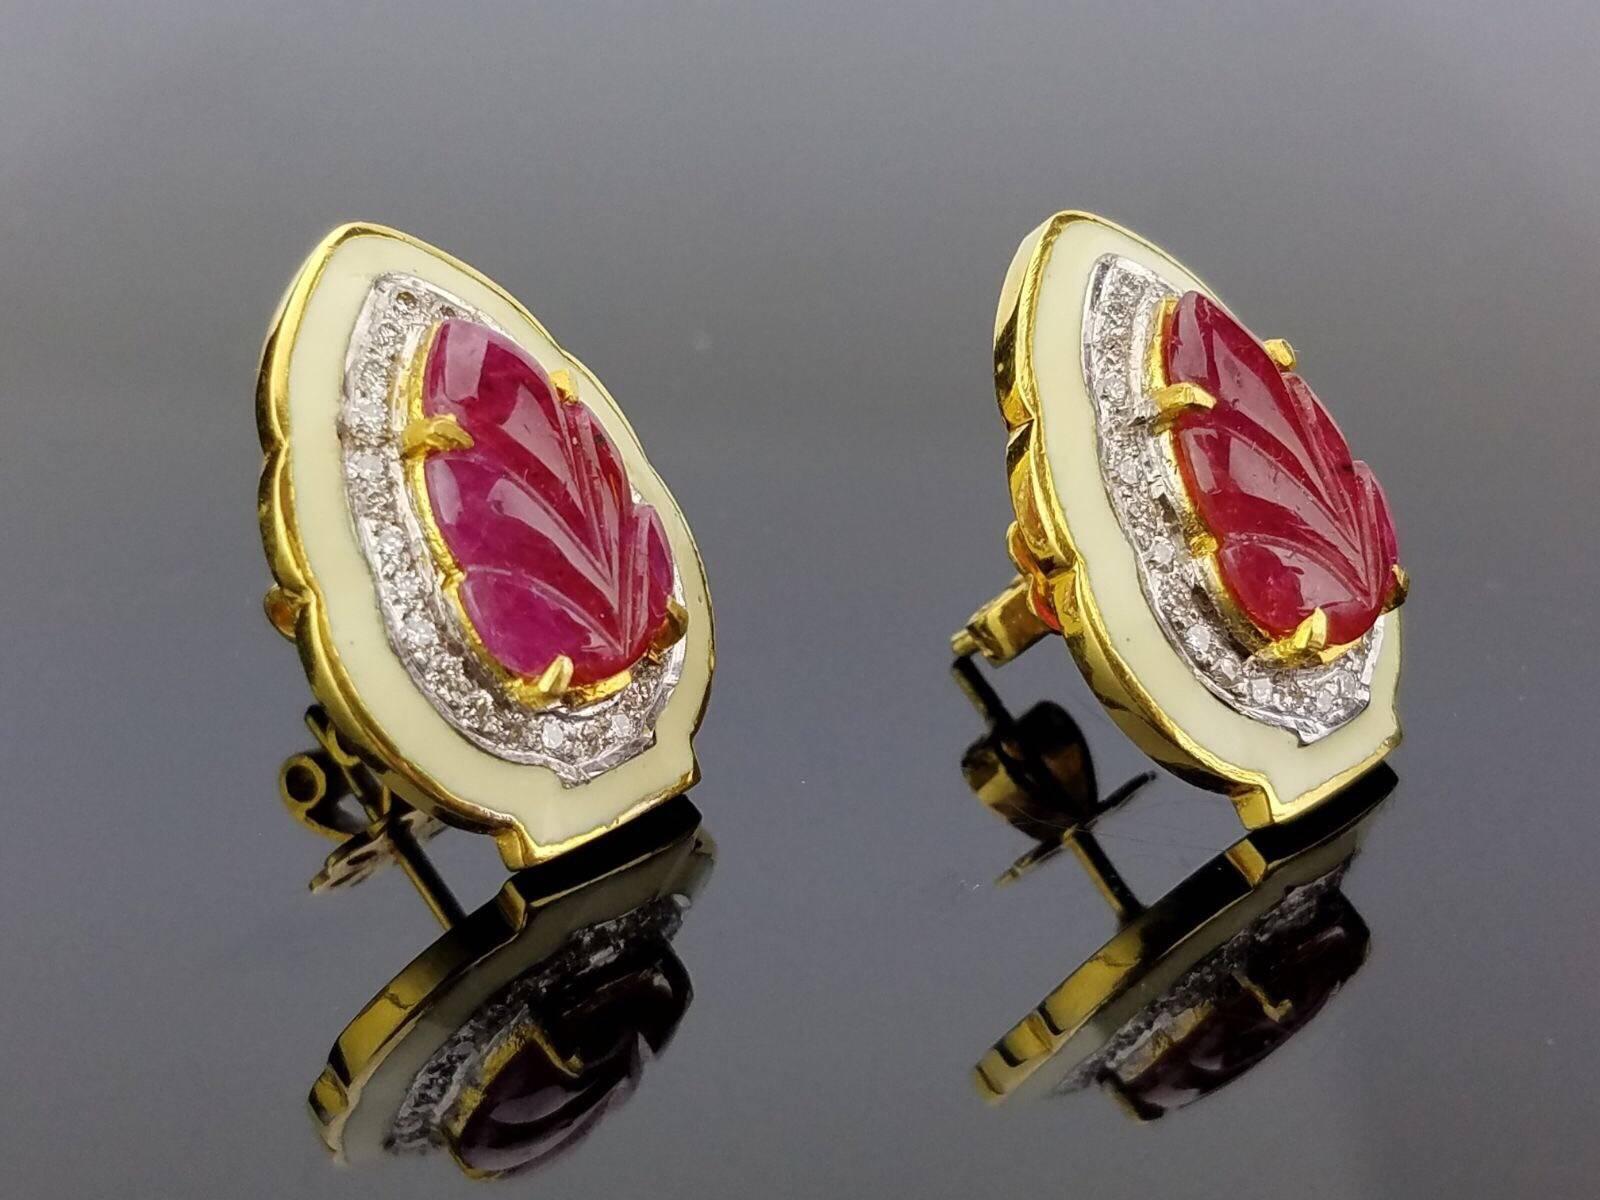 A unique pair of stud earrings, with leaf-shaped carved ruby and white diamonds, outlined with enamel. All set in 18K yellow gold. 

Ruby Weight: 5.23 carats
Diamond Weight: 0.49 carats (VS/SI , H/I) 
Gold Weight: 9.22 grams